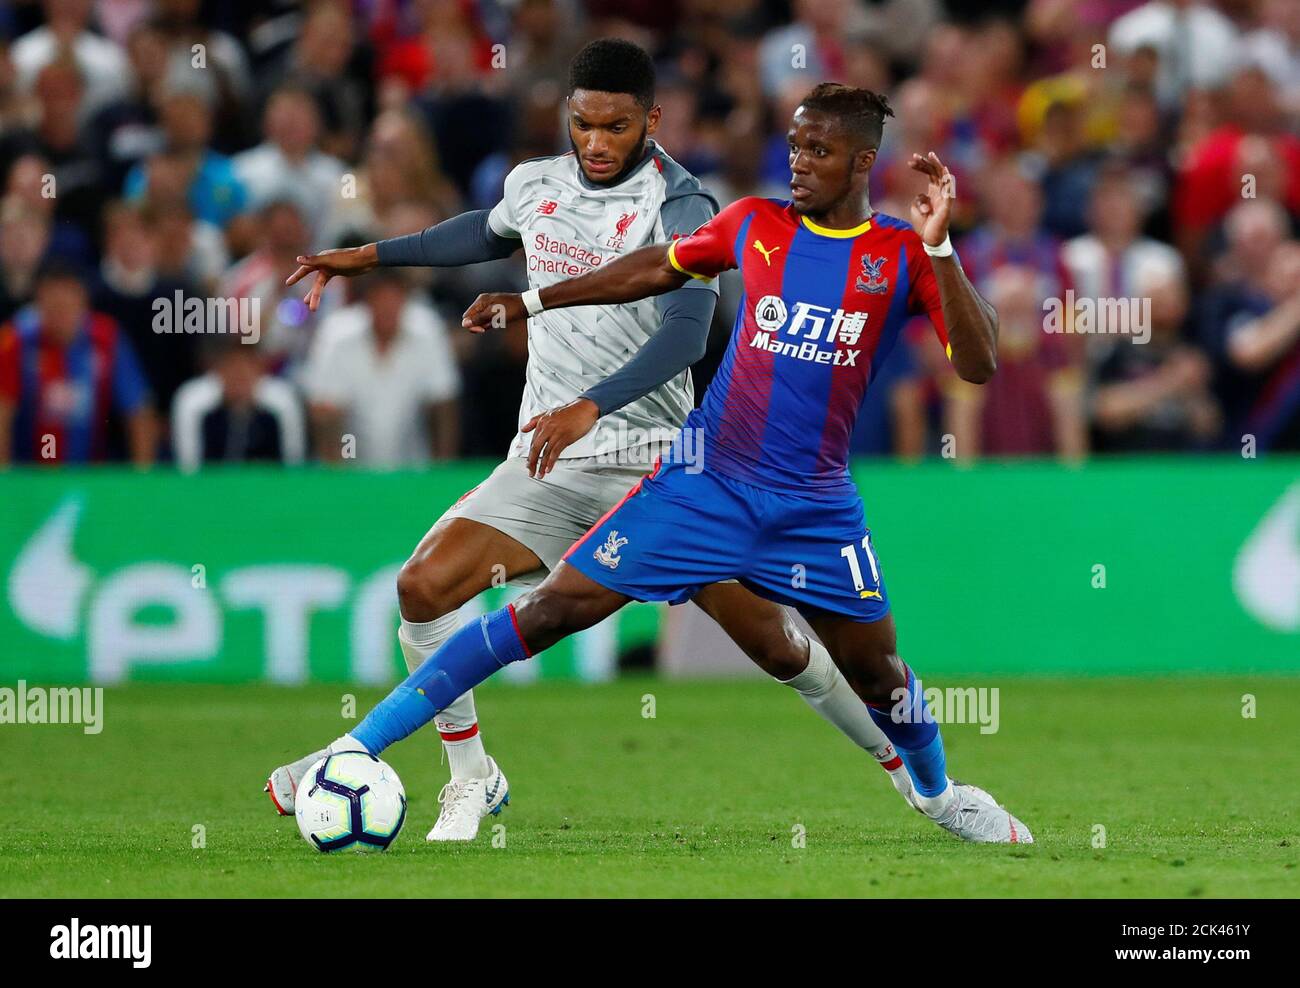 Soccer Football - Premier League - Crystal Palace v Liverpool - Selhurst Park, London, Britain - August 20, 2018  Crystal Palace's Wilfried Zaha in action with Liverpool's Joe Gomez                     REUTERS/Eddie Keogh  EDITORIAL USE ONLY. No use with unauthorized audio, video, data, fixture lists, club/league logos or "live" services. Online in-match use limited to 75 images, no video emulation. No use in betting, games or single club/league/player publications.  Please contact your account representative for further details. Stock Photo